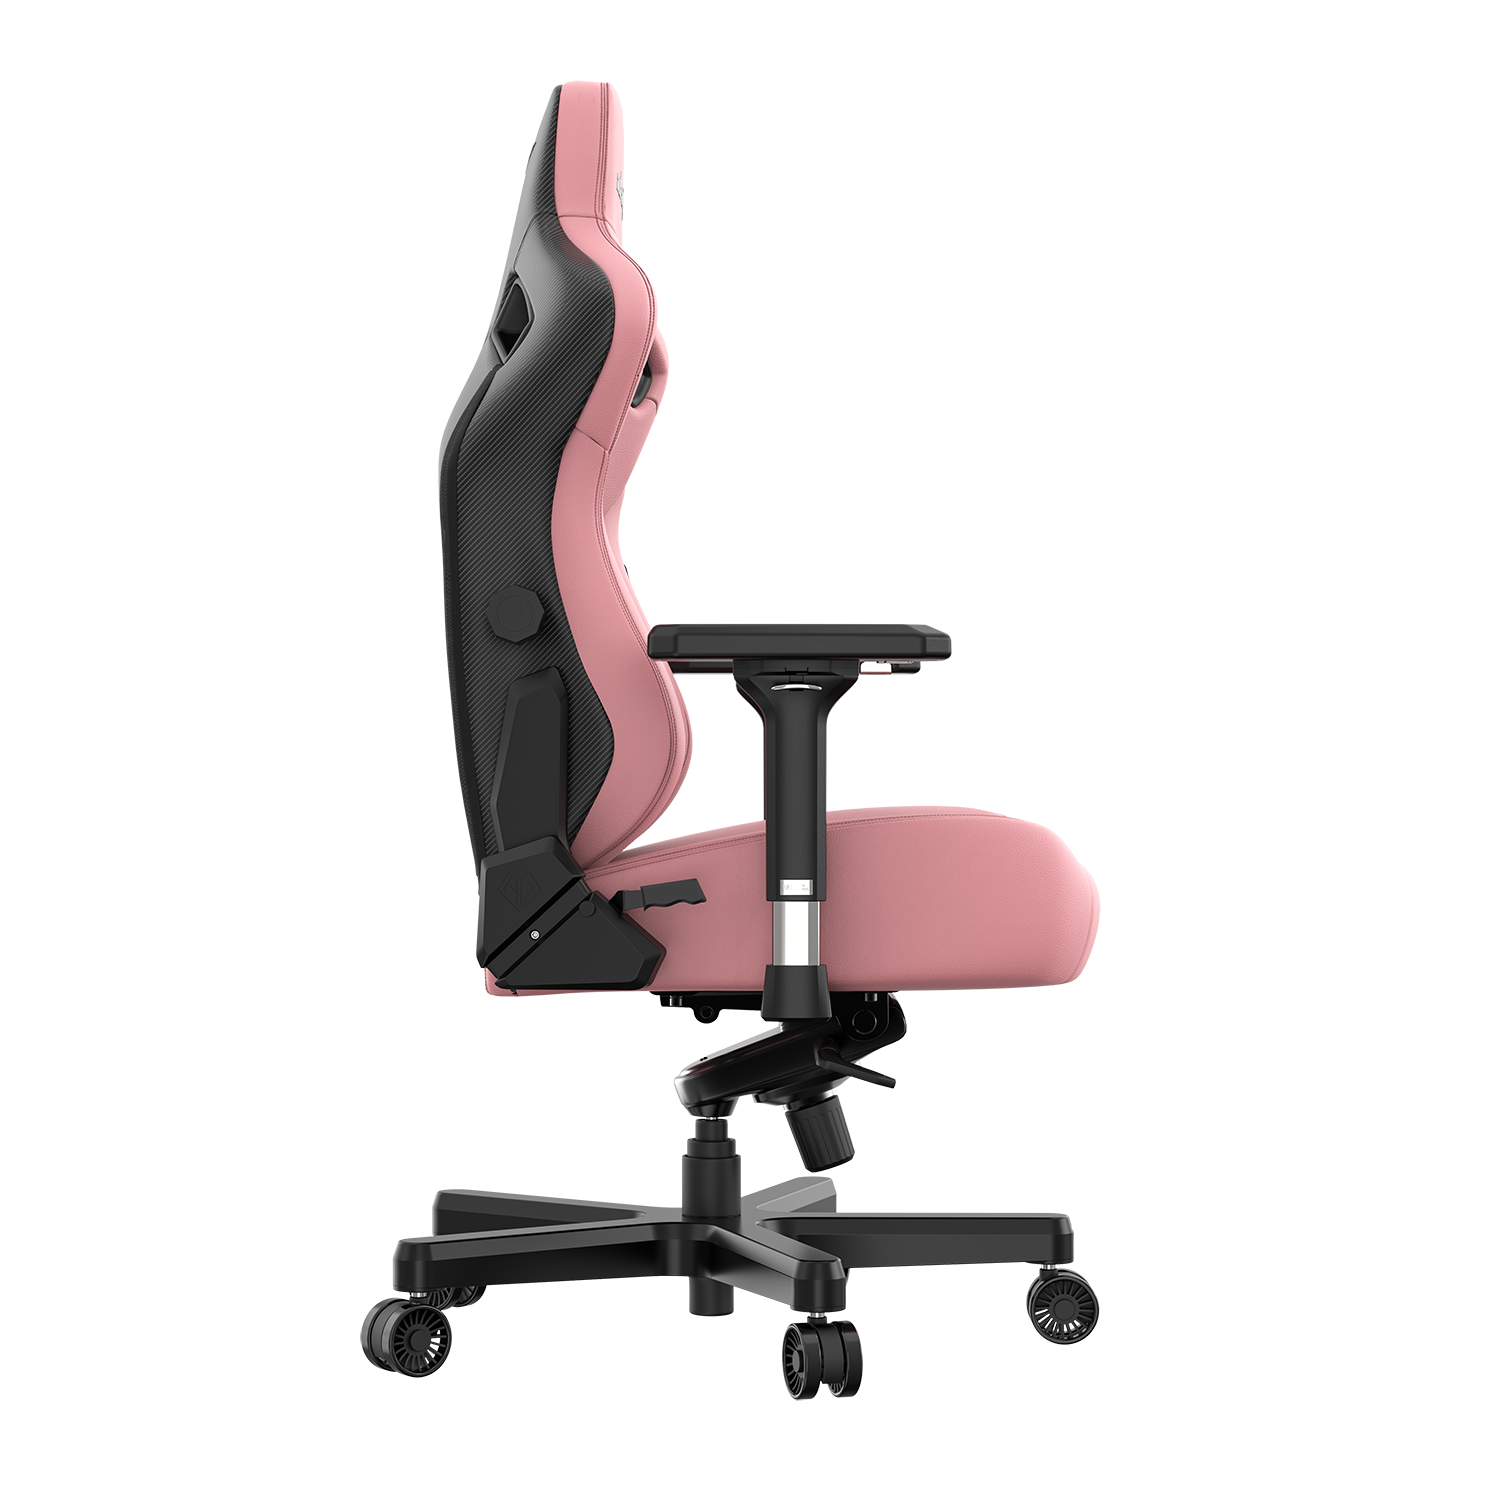 ANDA SEAT KAISER 3 L SIZE DURAXTRA LEATHERETTE - CREAMY PINK